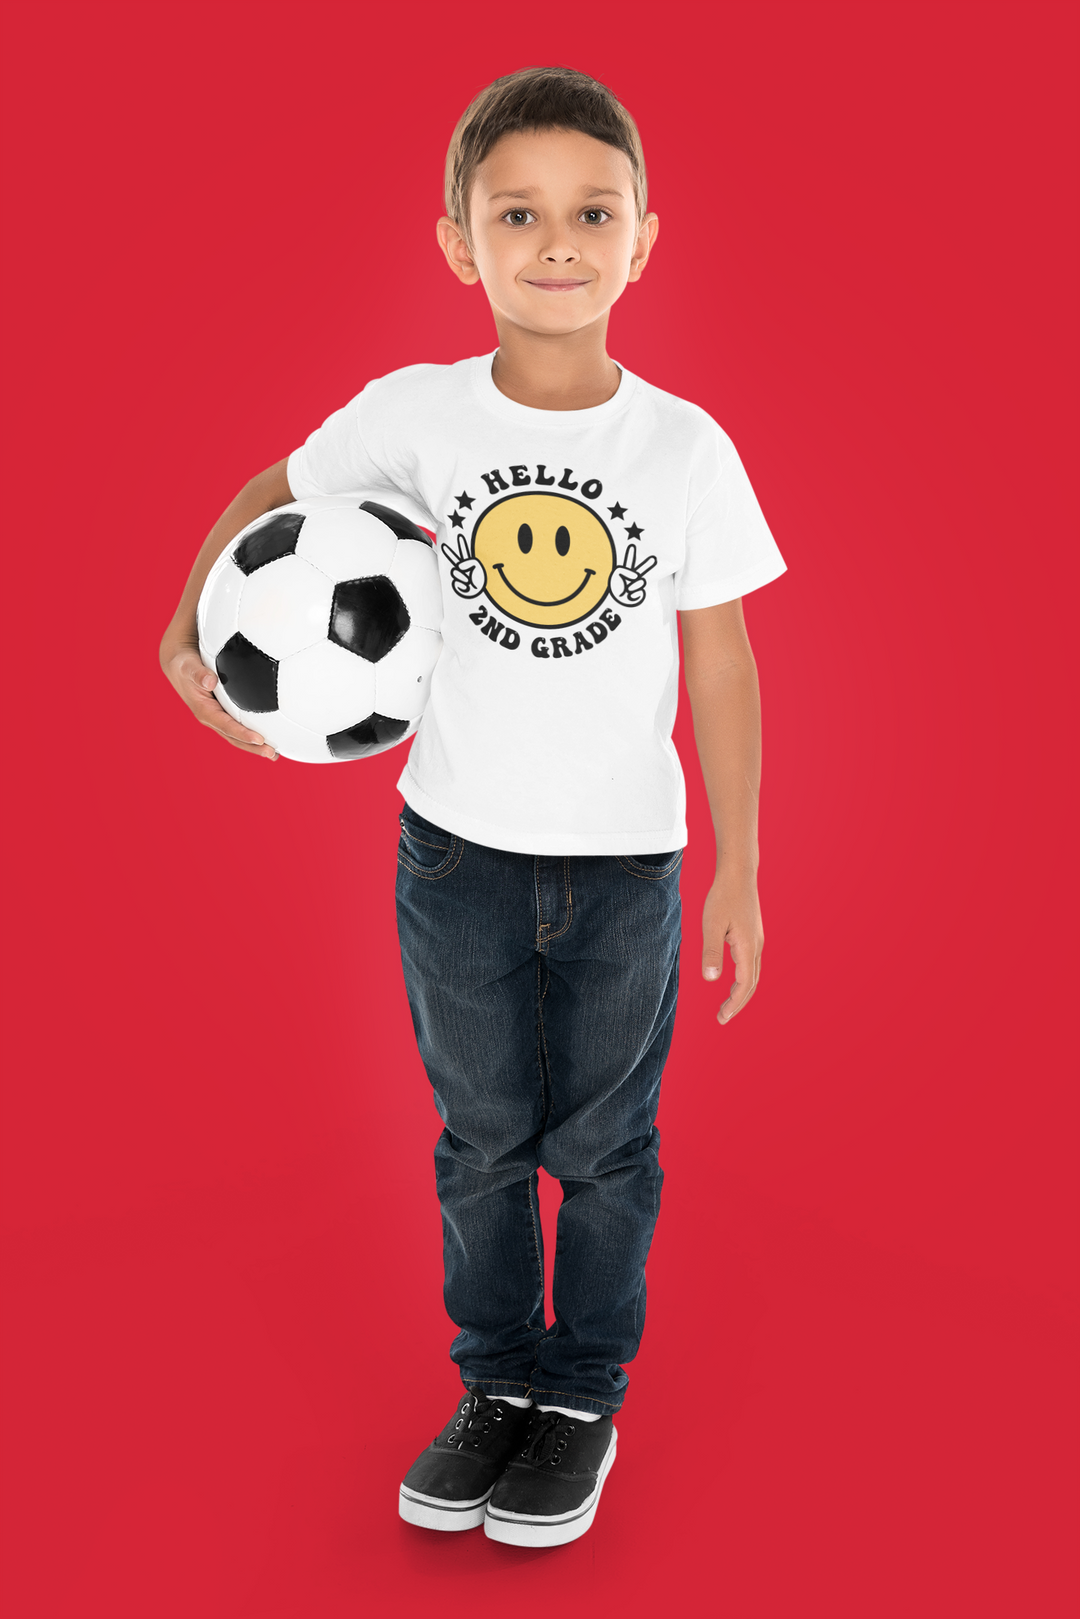 A boy holding a football ball, wearing a Hello 2nd Grade Kids Tee from Worlds Worst Tees. Made of 100% cotton, light fabric, classic fit, tear-away label, and durable twill tape shoulders.